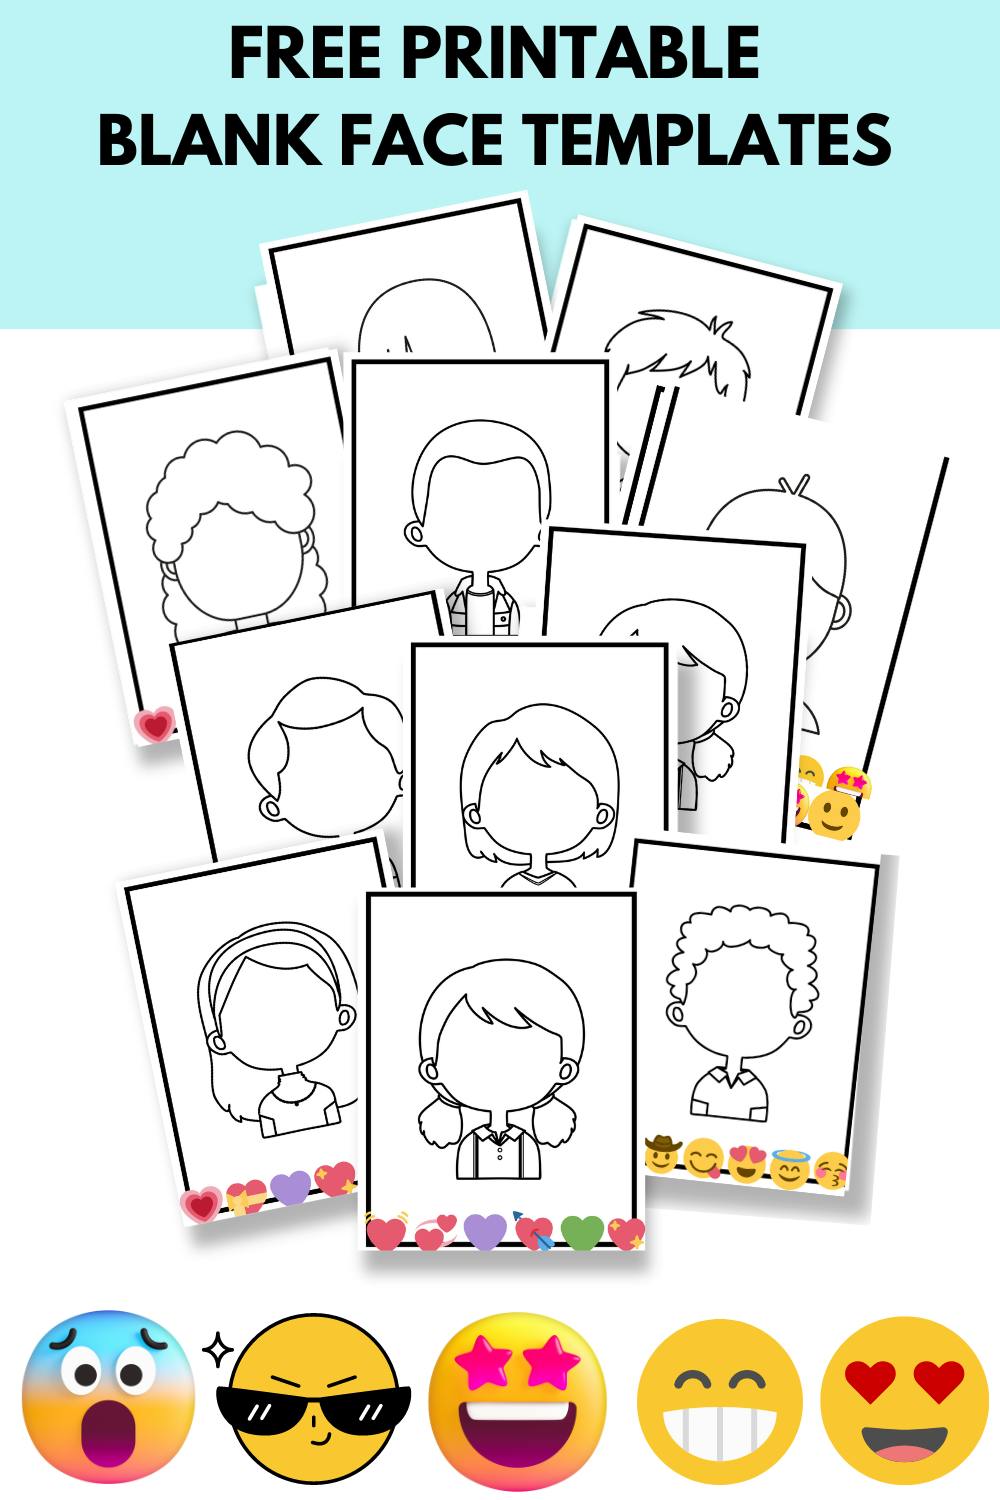 18 Free Blank Face Template Printables - 24Hourfamily.Com